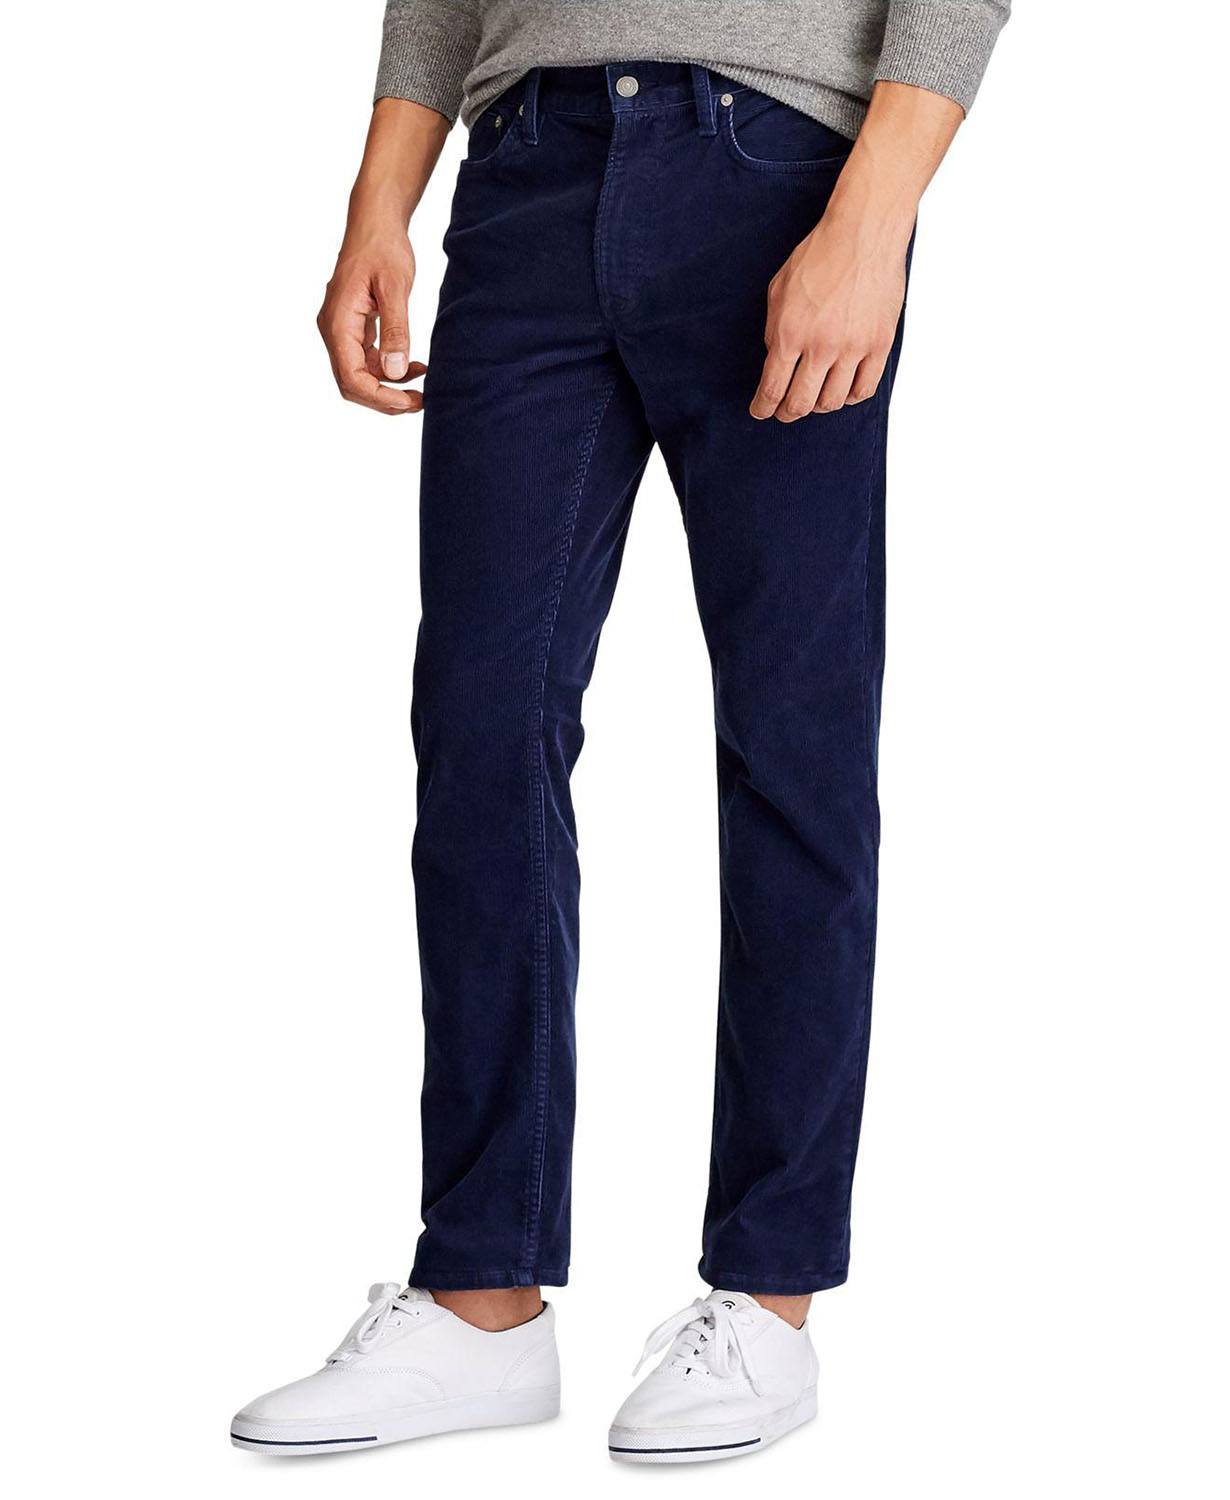 Polo Ralph Lauren Big/Tall Stretch Cord 5 Pocket Pants in Navy